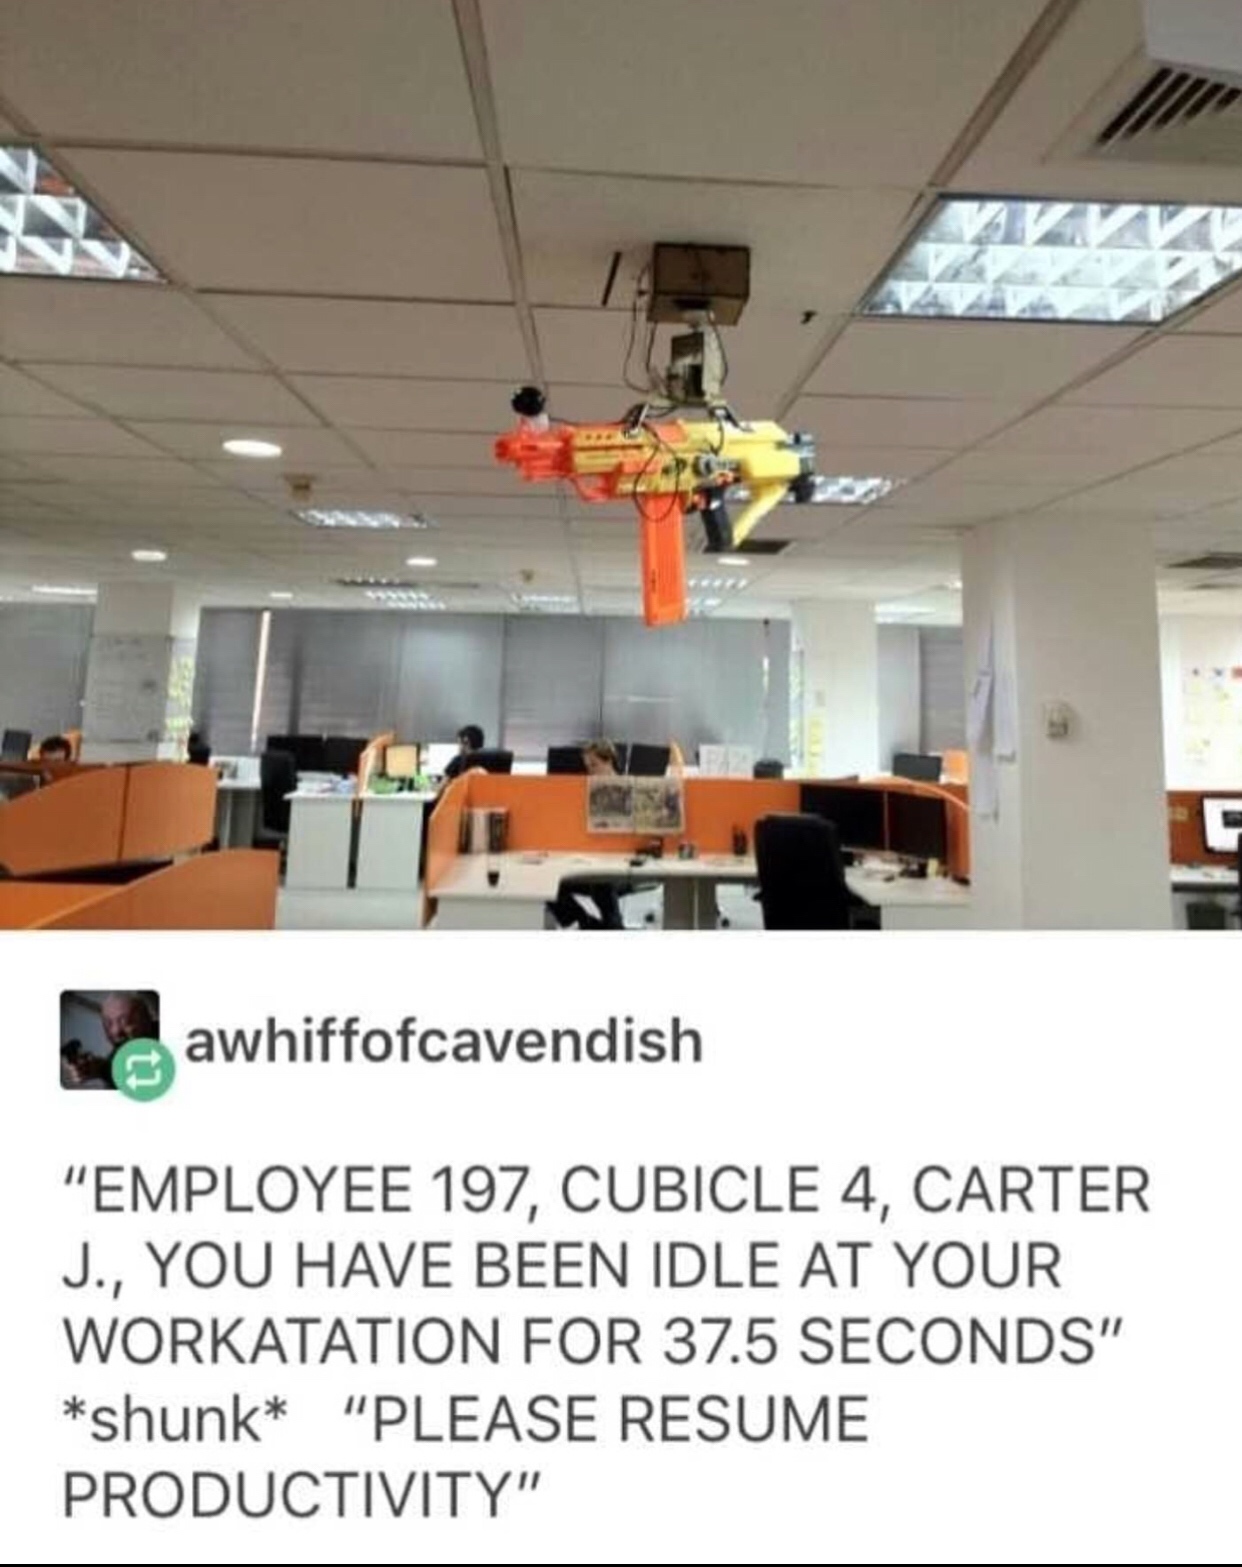 employee 197 cubicle 4 - awhiffofcavendish "Employee 197, Cubicle 4, Carter J., You Have Been Idle At Your Workatation For 37.5 Seconds" shunk "Please Resume Productivity"